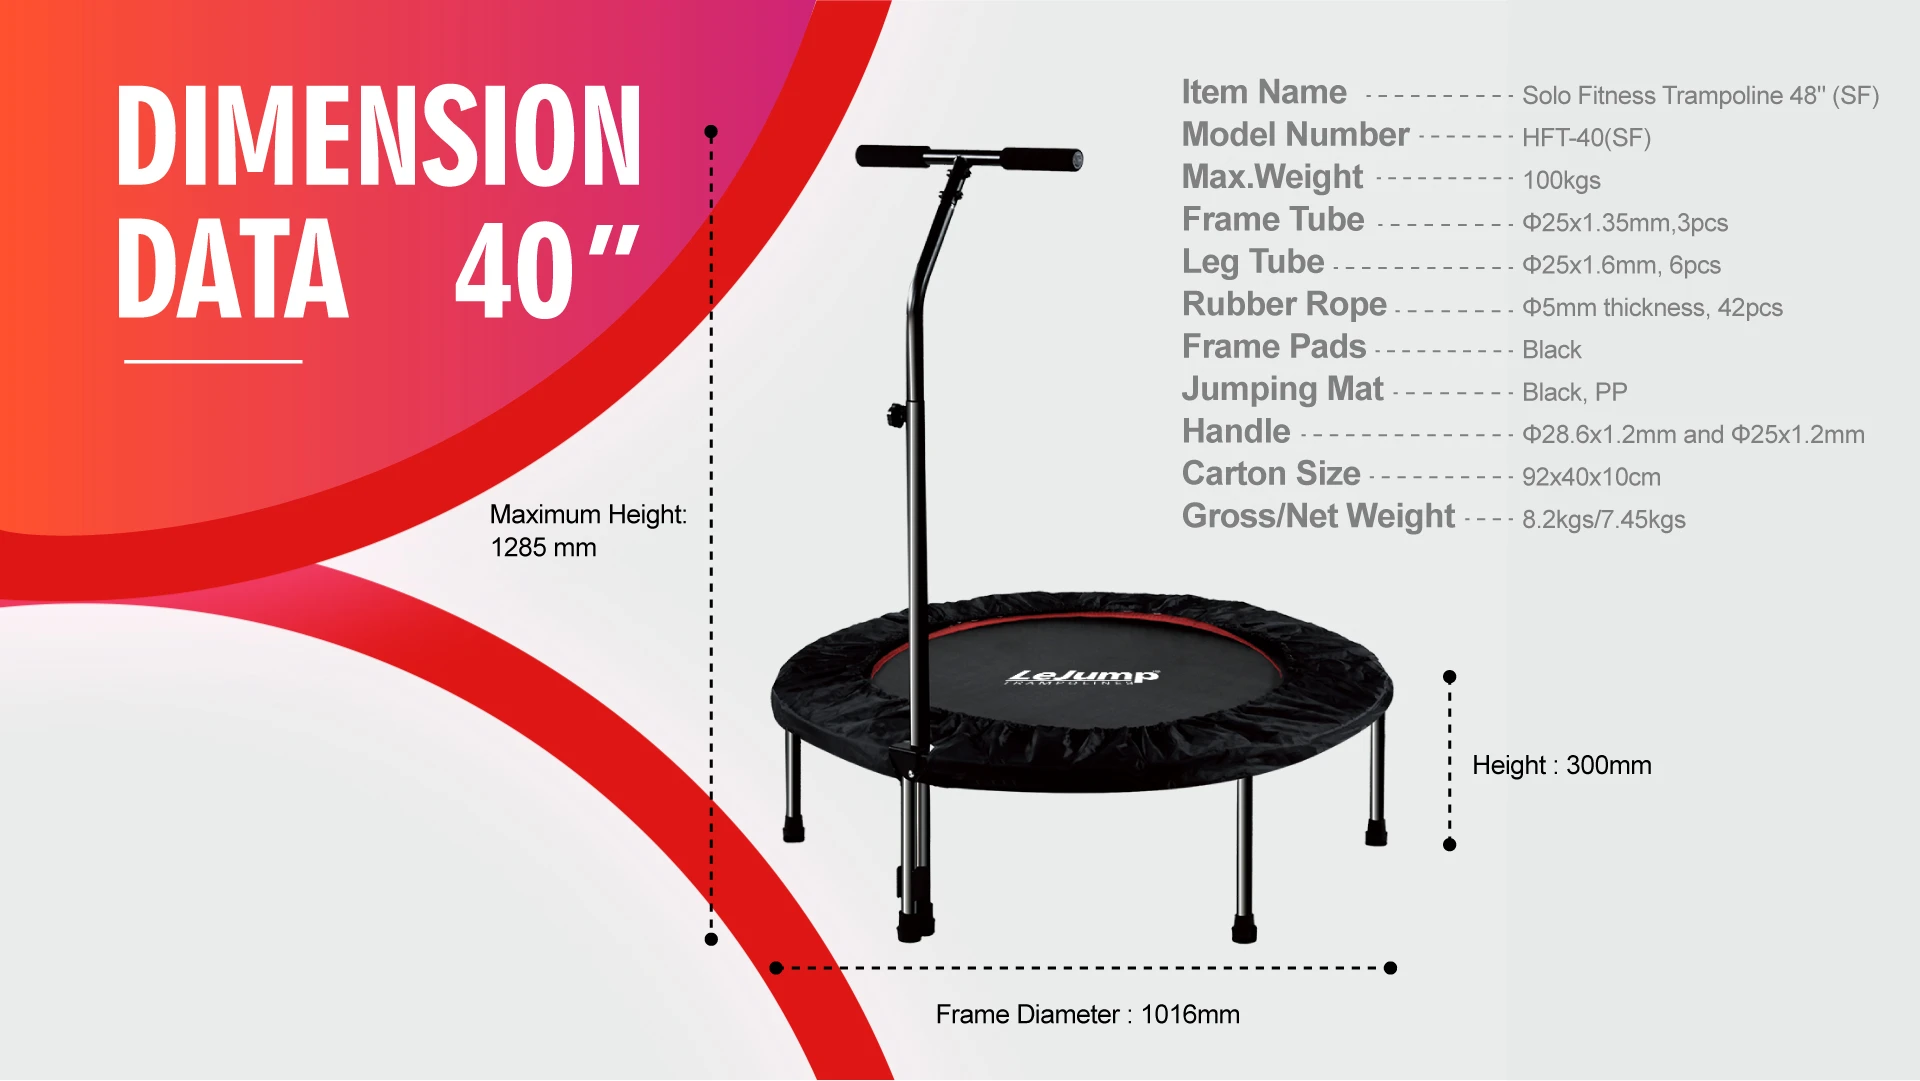 Solo Relax Fitness Trampoline